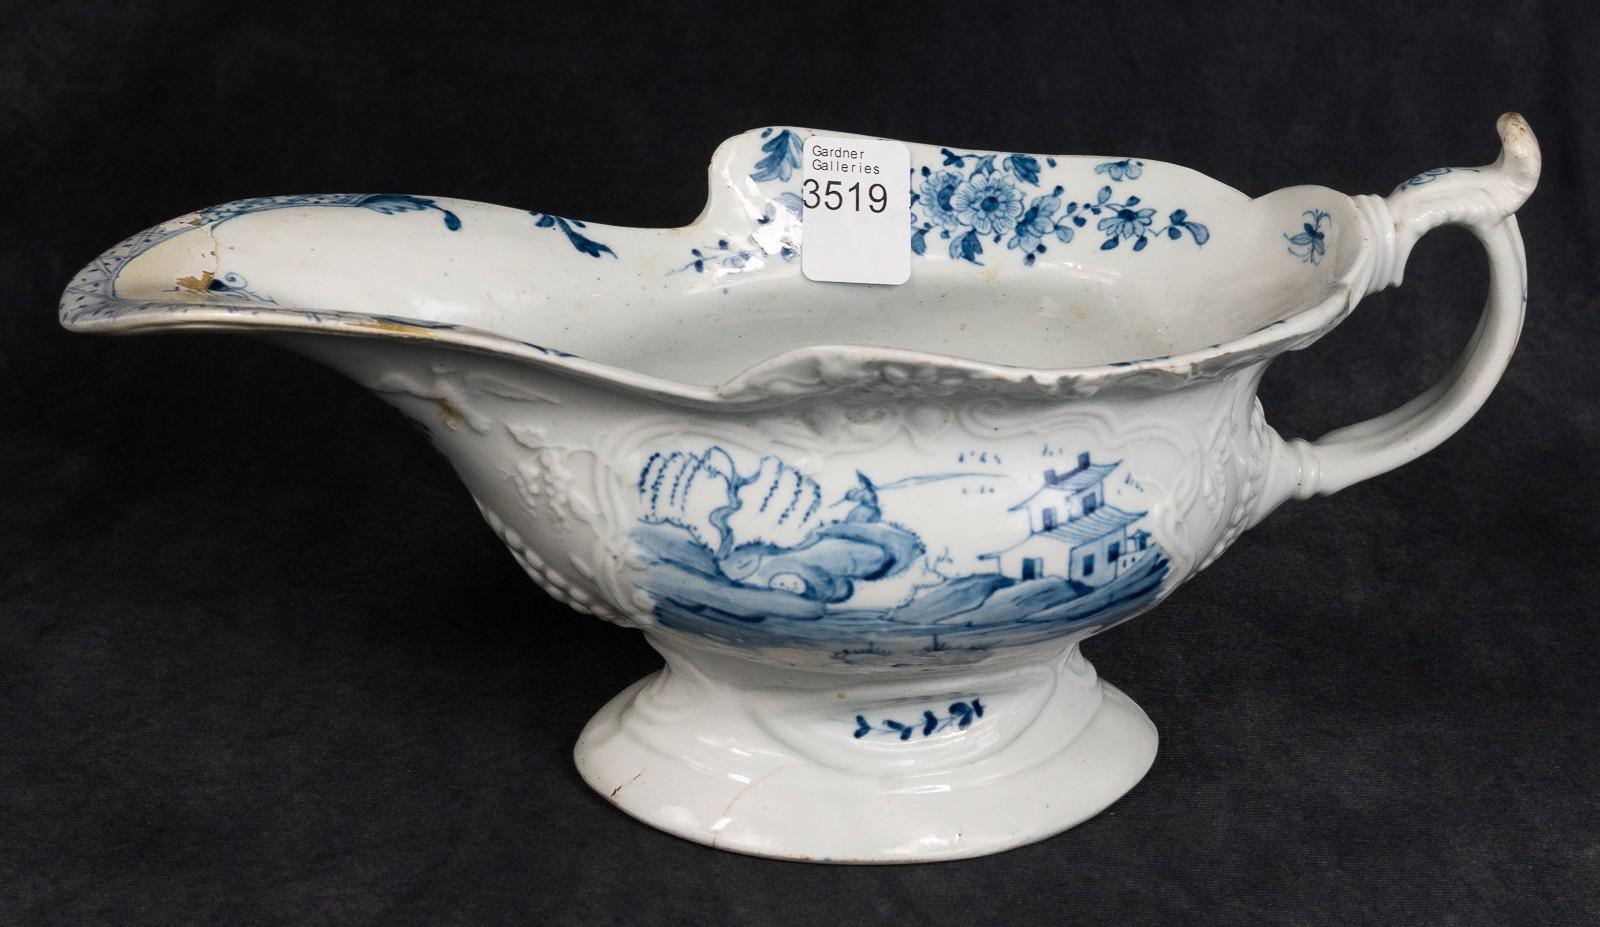 EARLY WORCESTER SAUCE BOAT